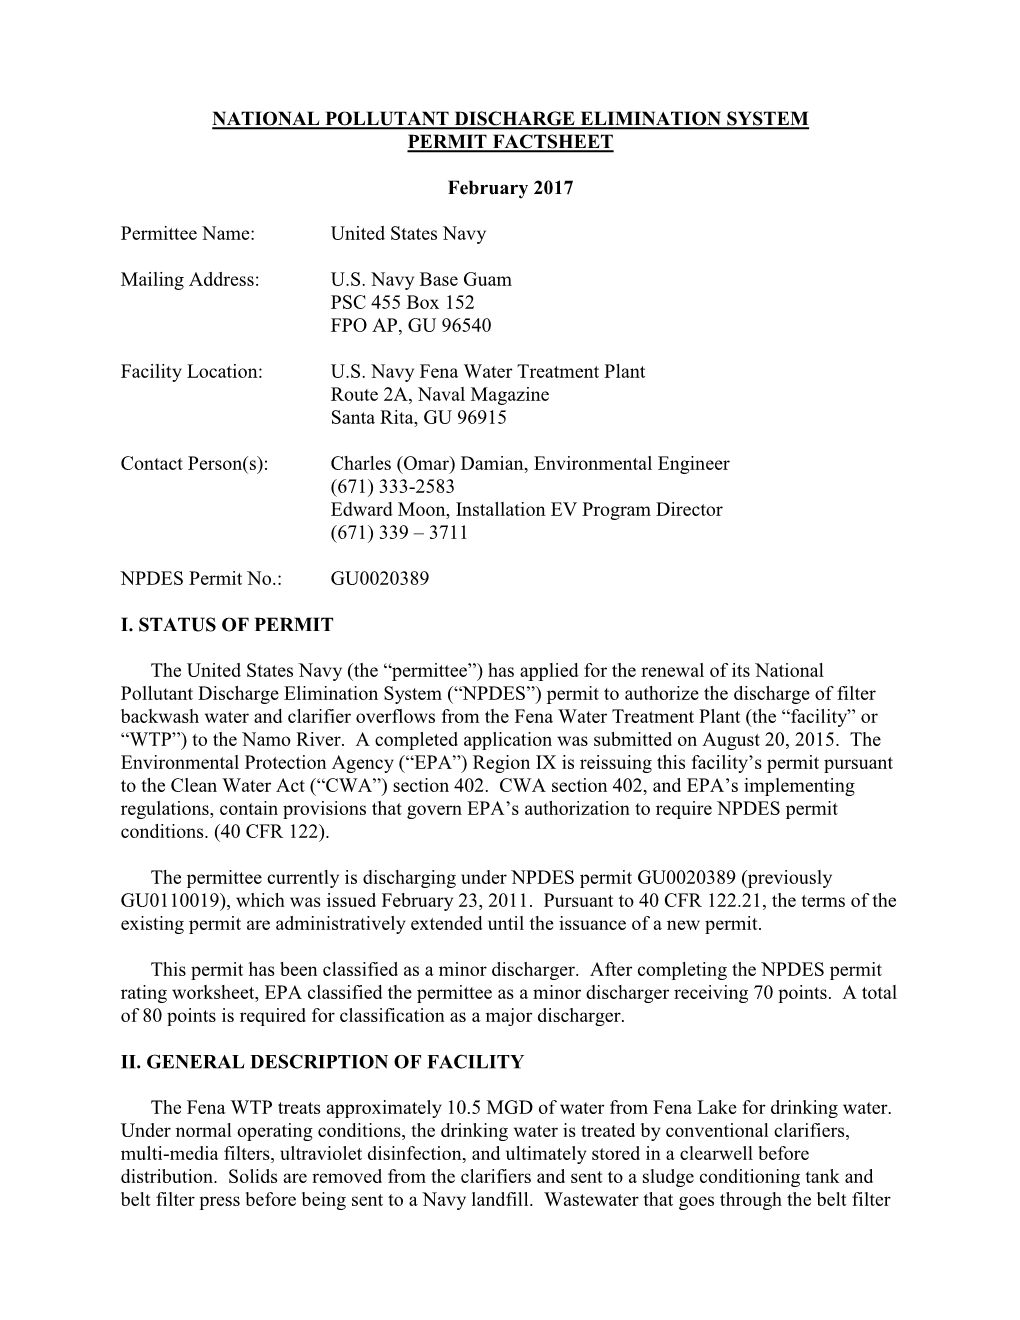 NPDES Permit No. GU0020389 Factsheet Page 2 of 22 Press Is Recycled to the Headworks and Reprocessed